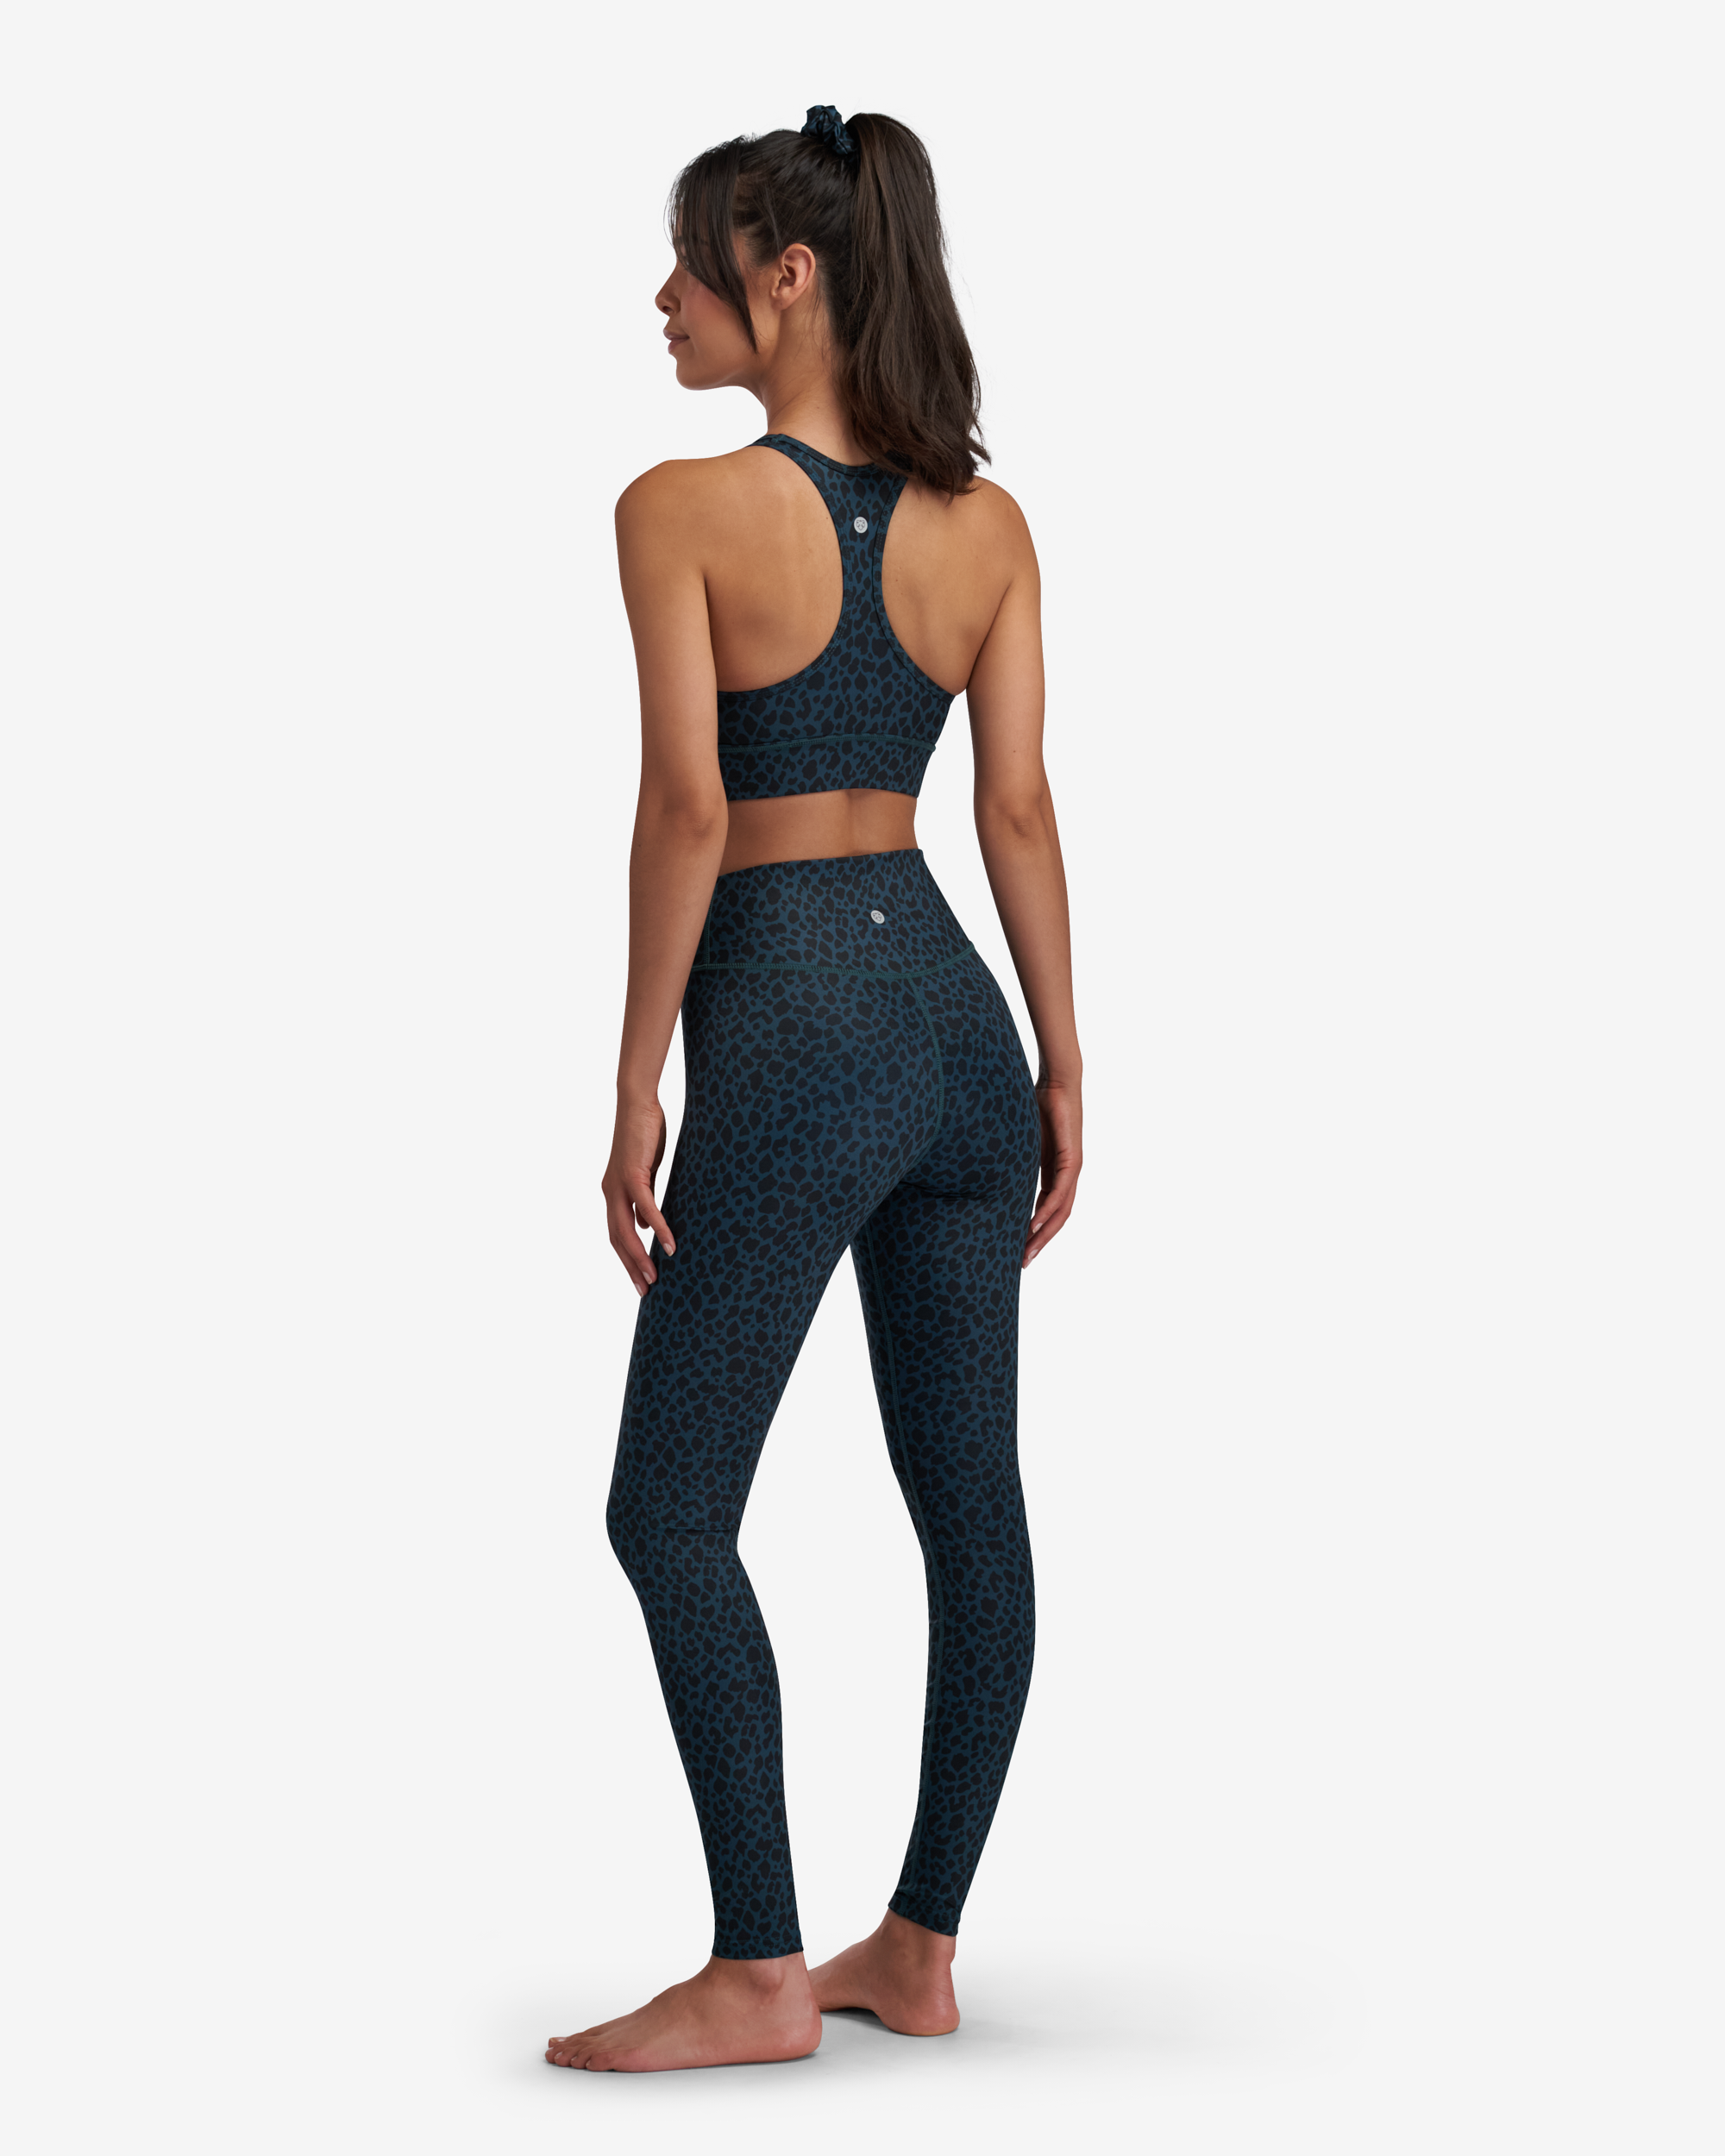 A-dam active legging with memphis print from recycled plastic bottles